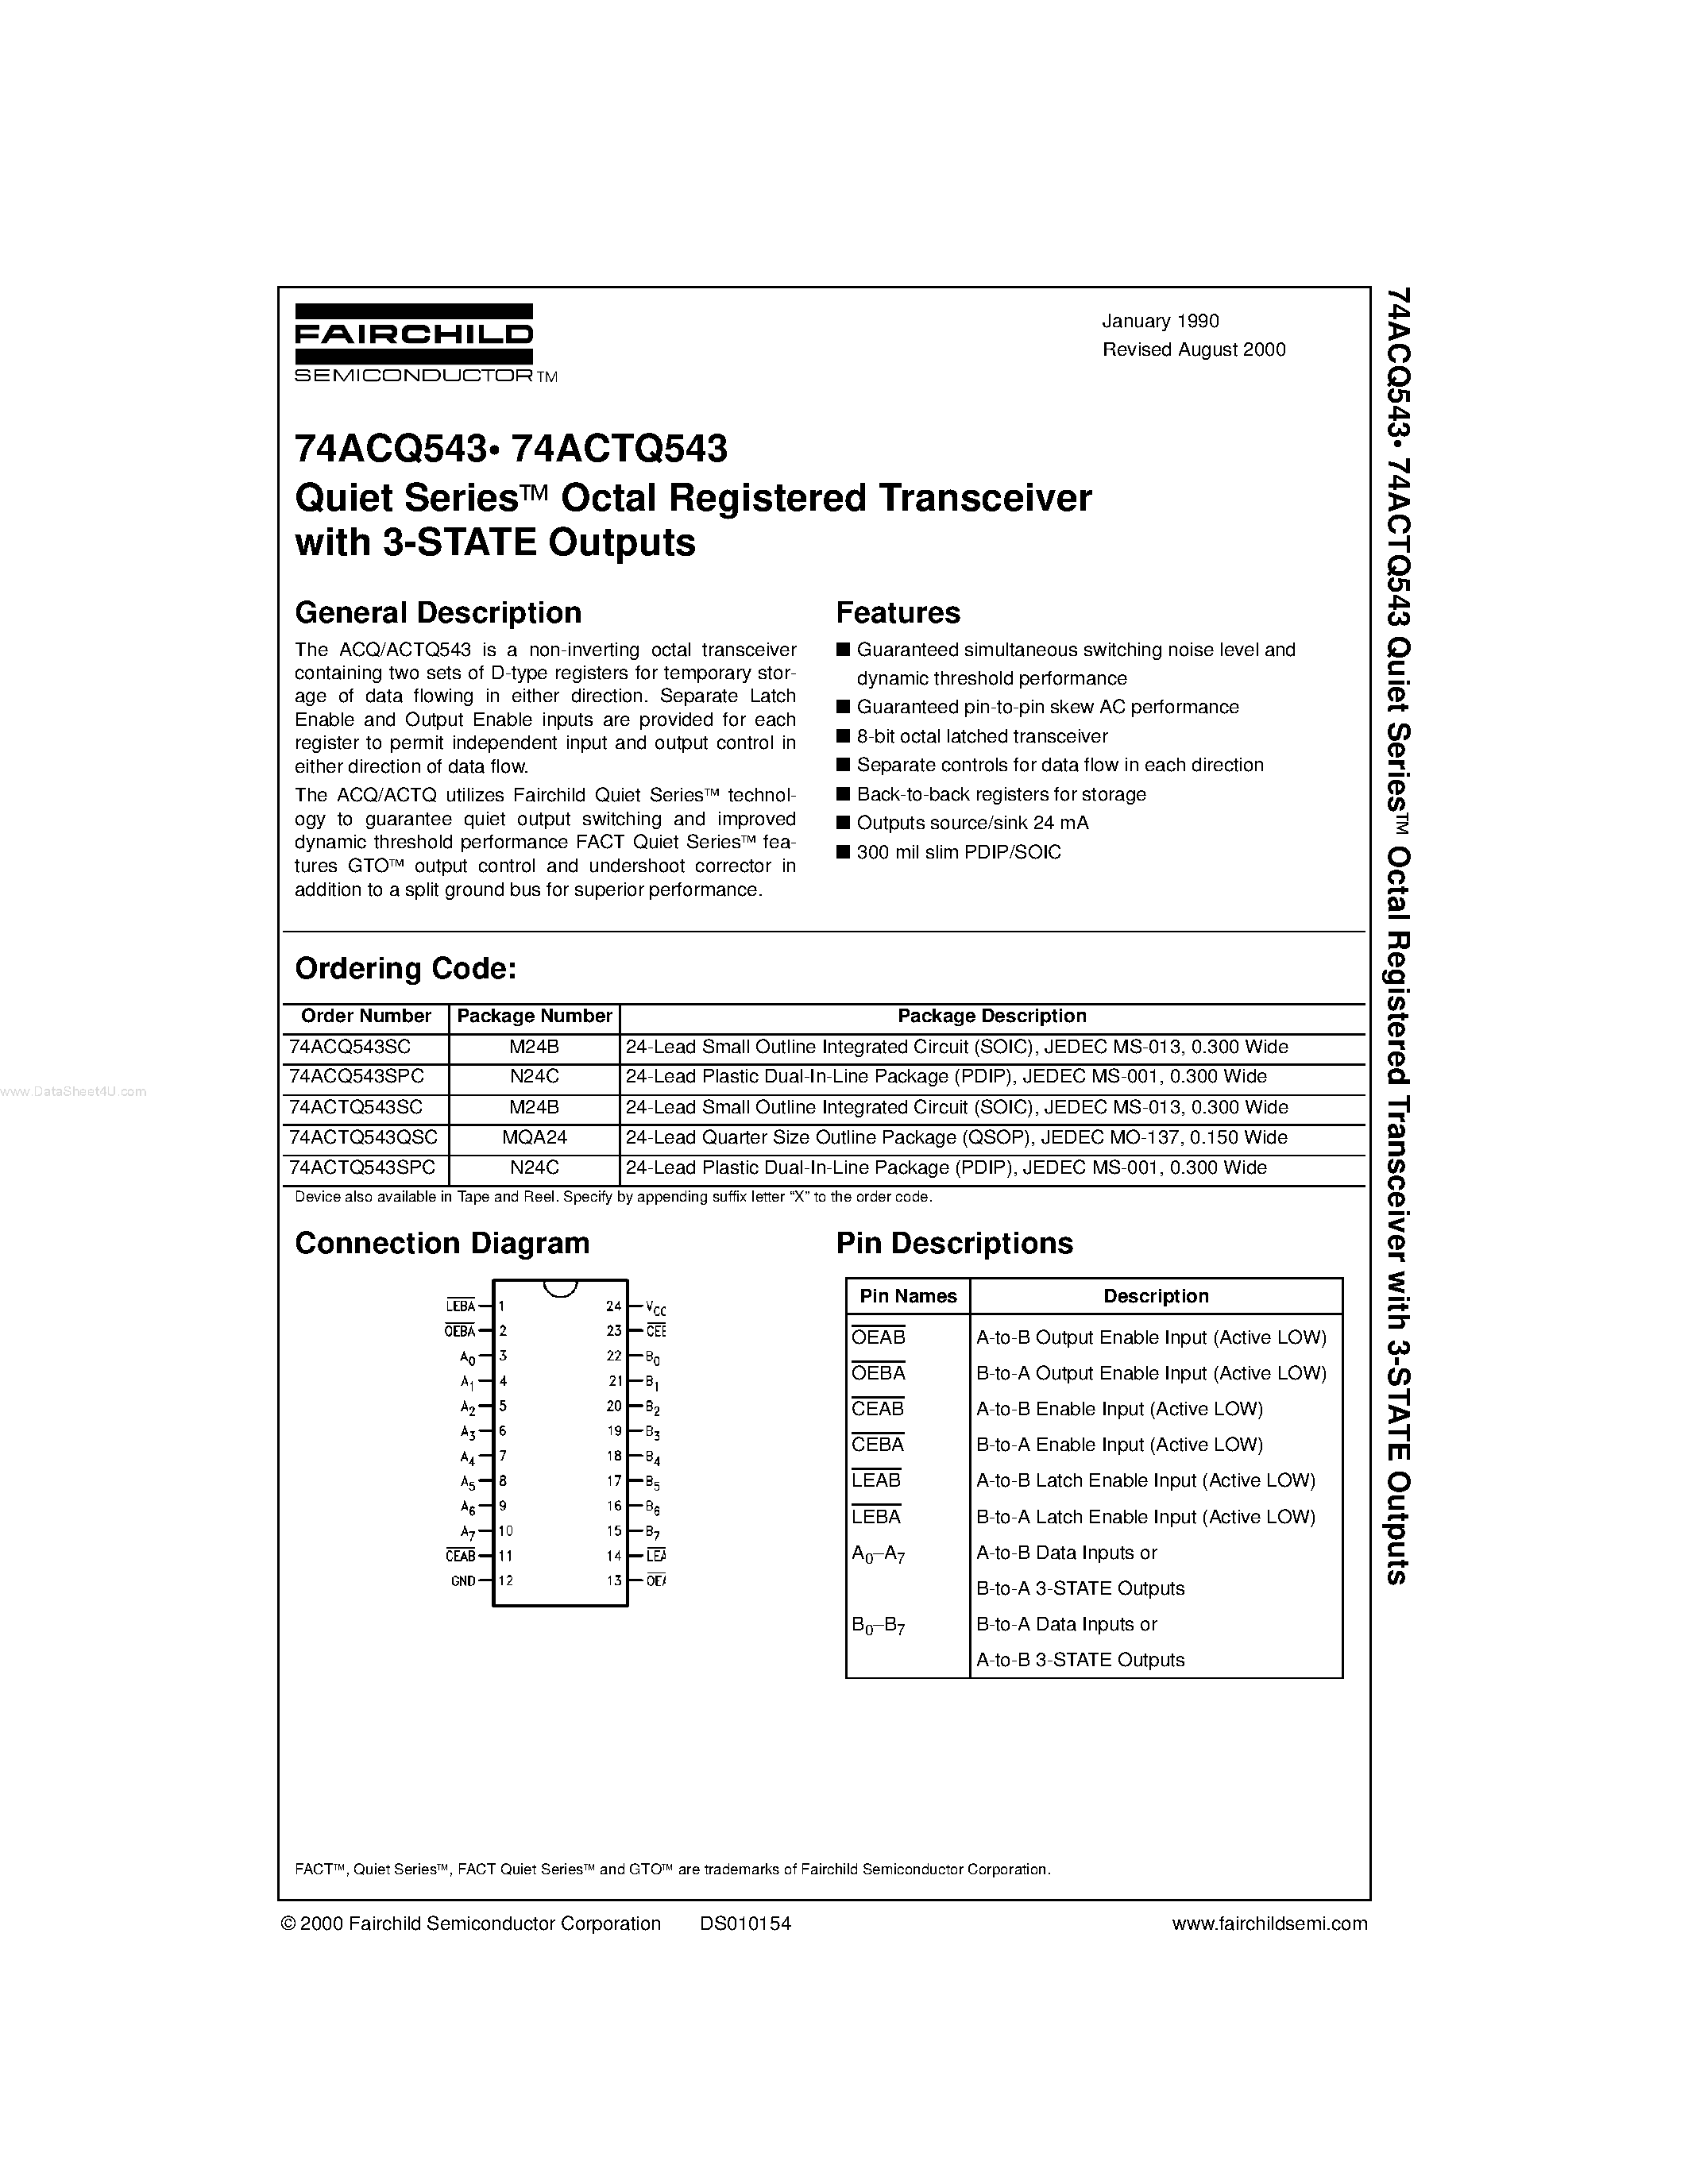 Datasheet 74ACTQ543QSC - Quiet Series Octal Registered Transceiver with 3-STATE Outputs page 1